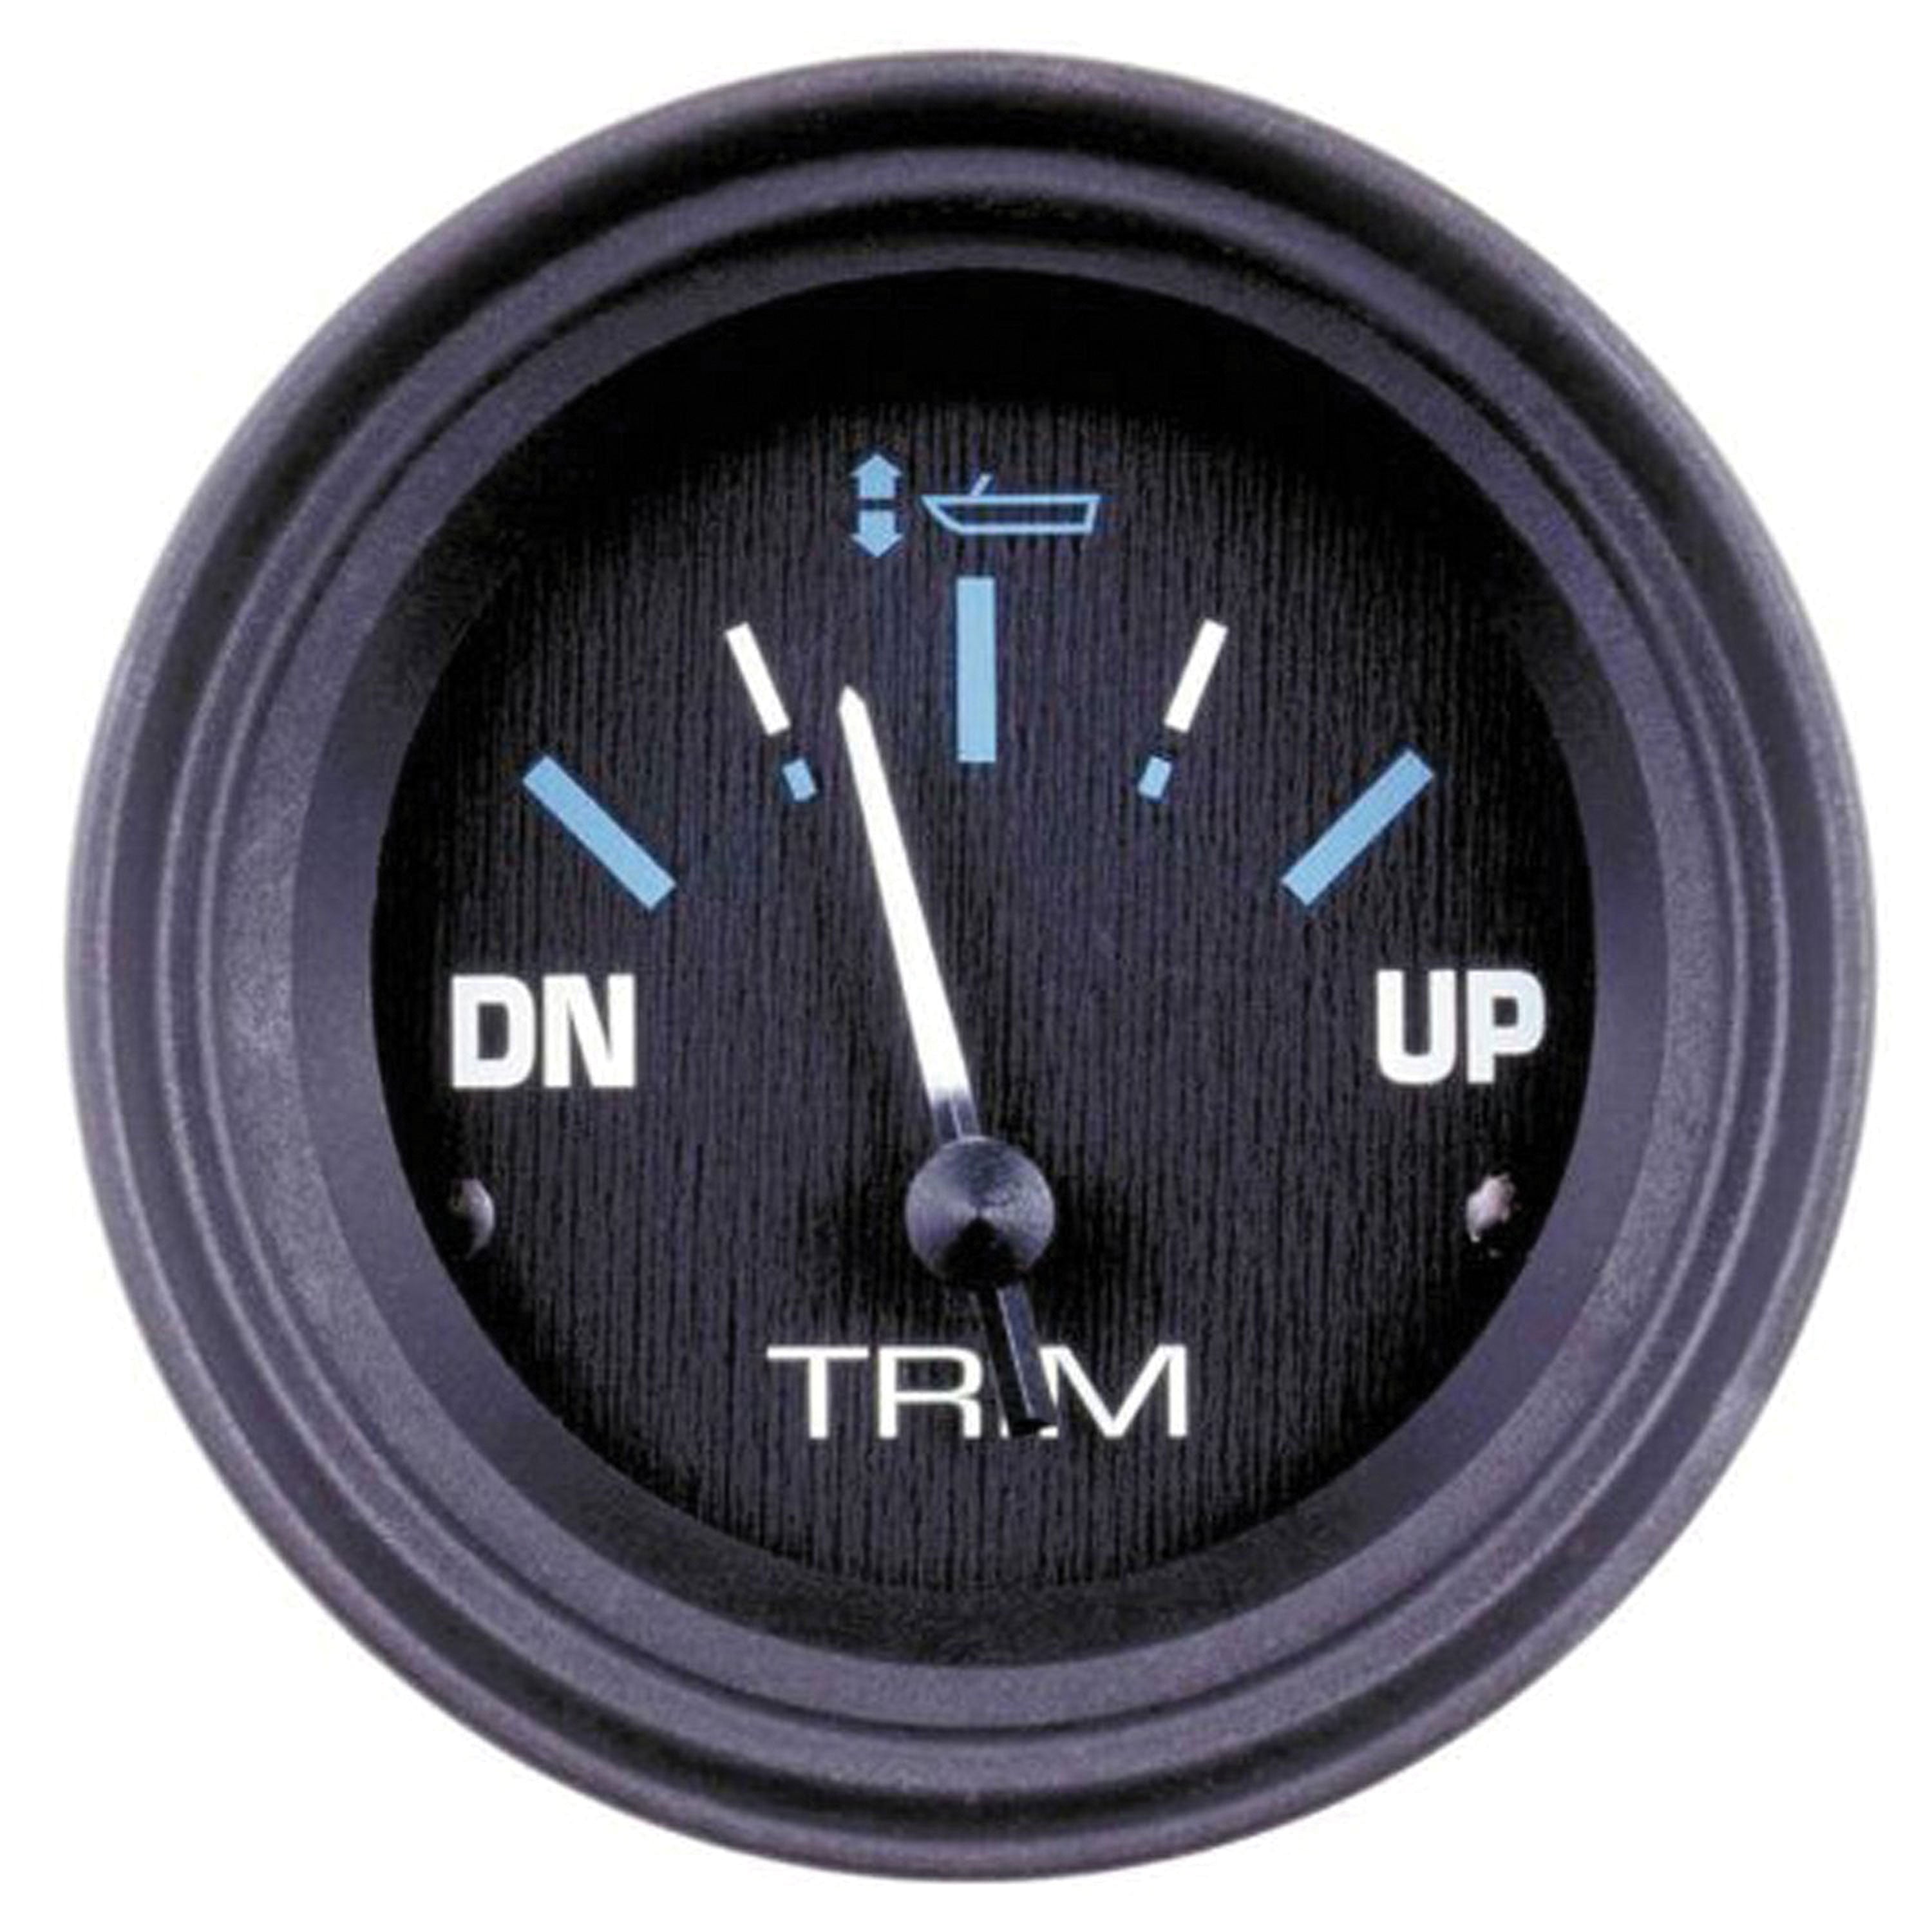 Sierra 68406P Eclipse Trim Gauge for pre-2001 Yamaha Outboards